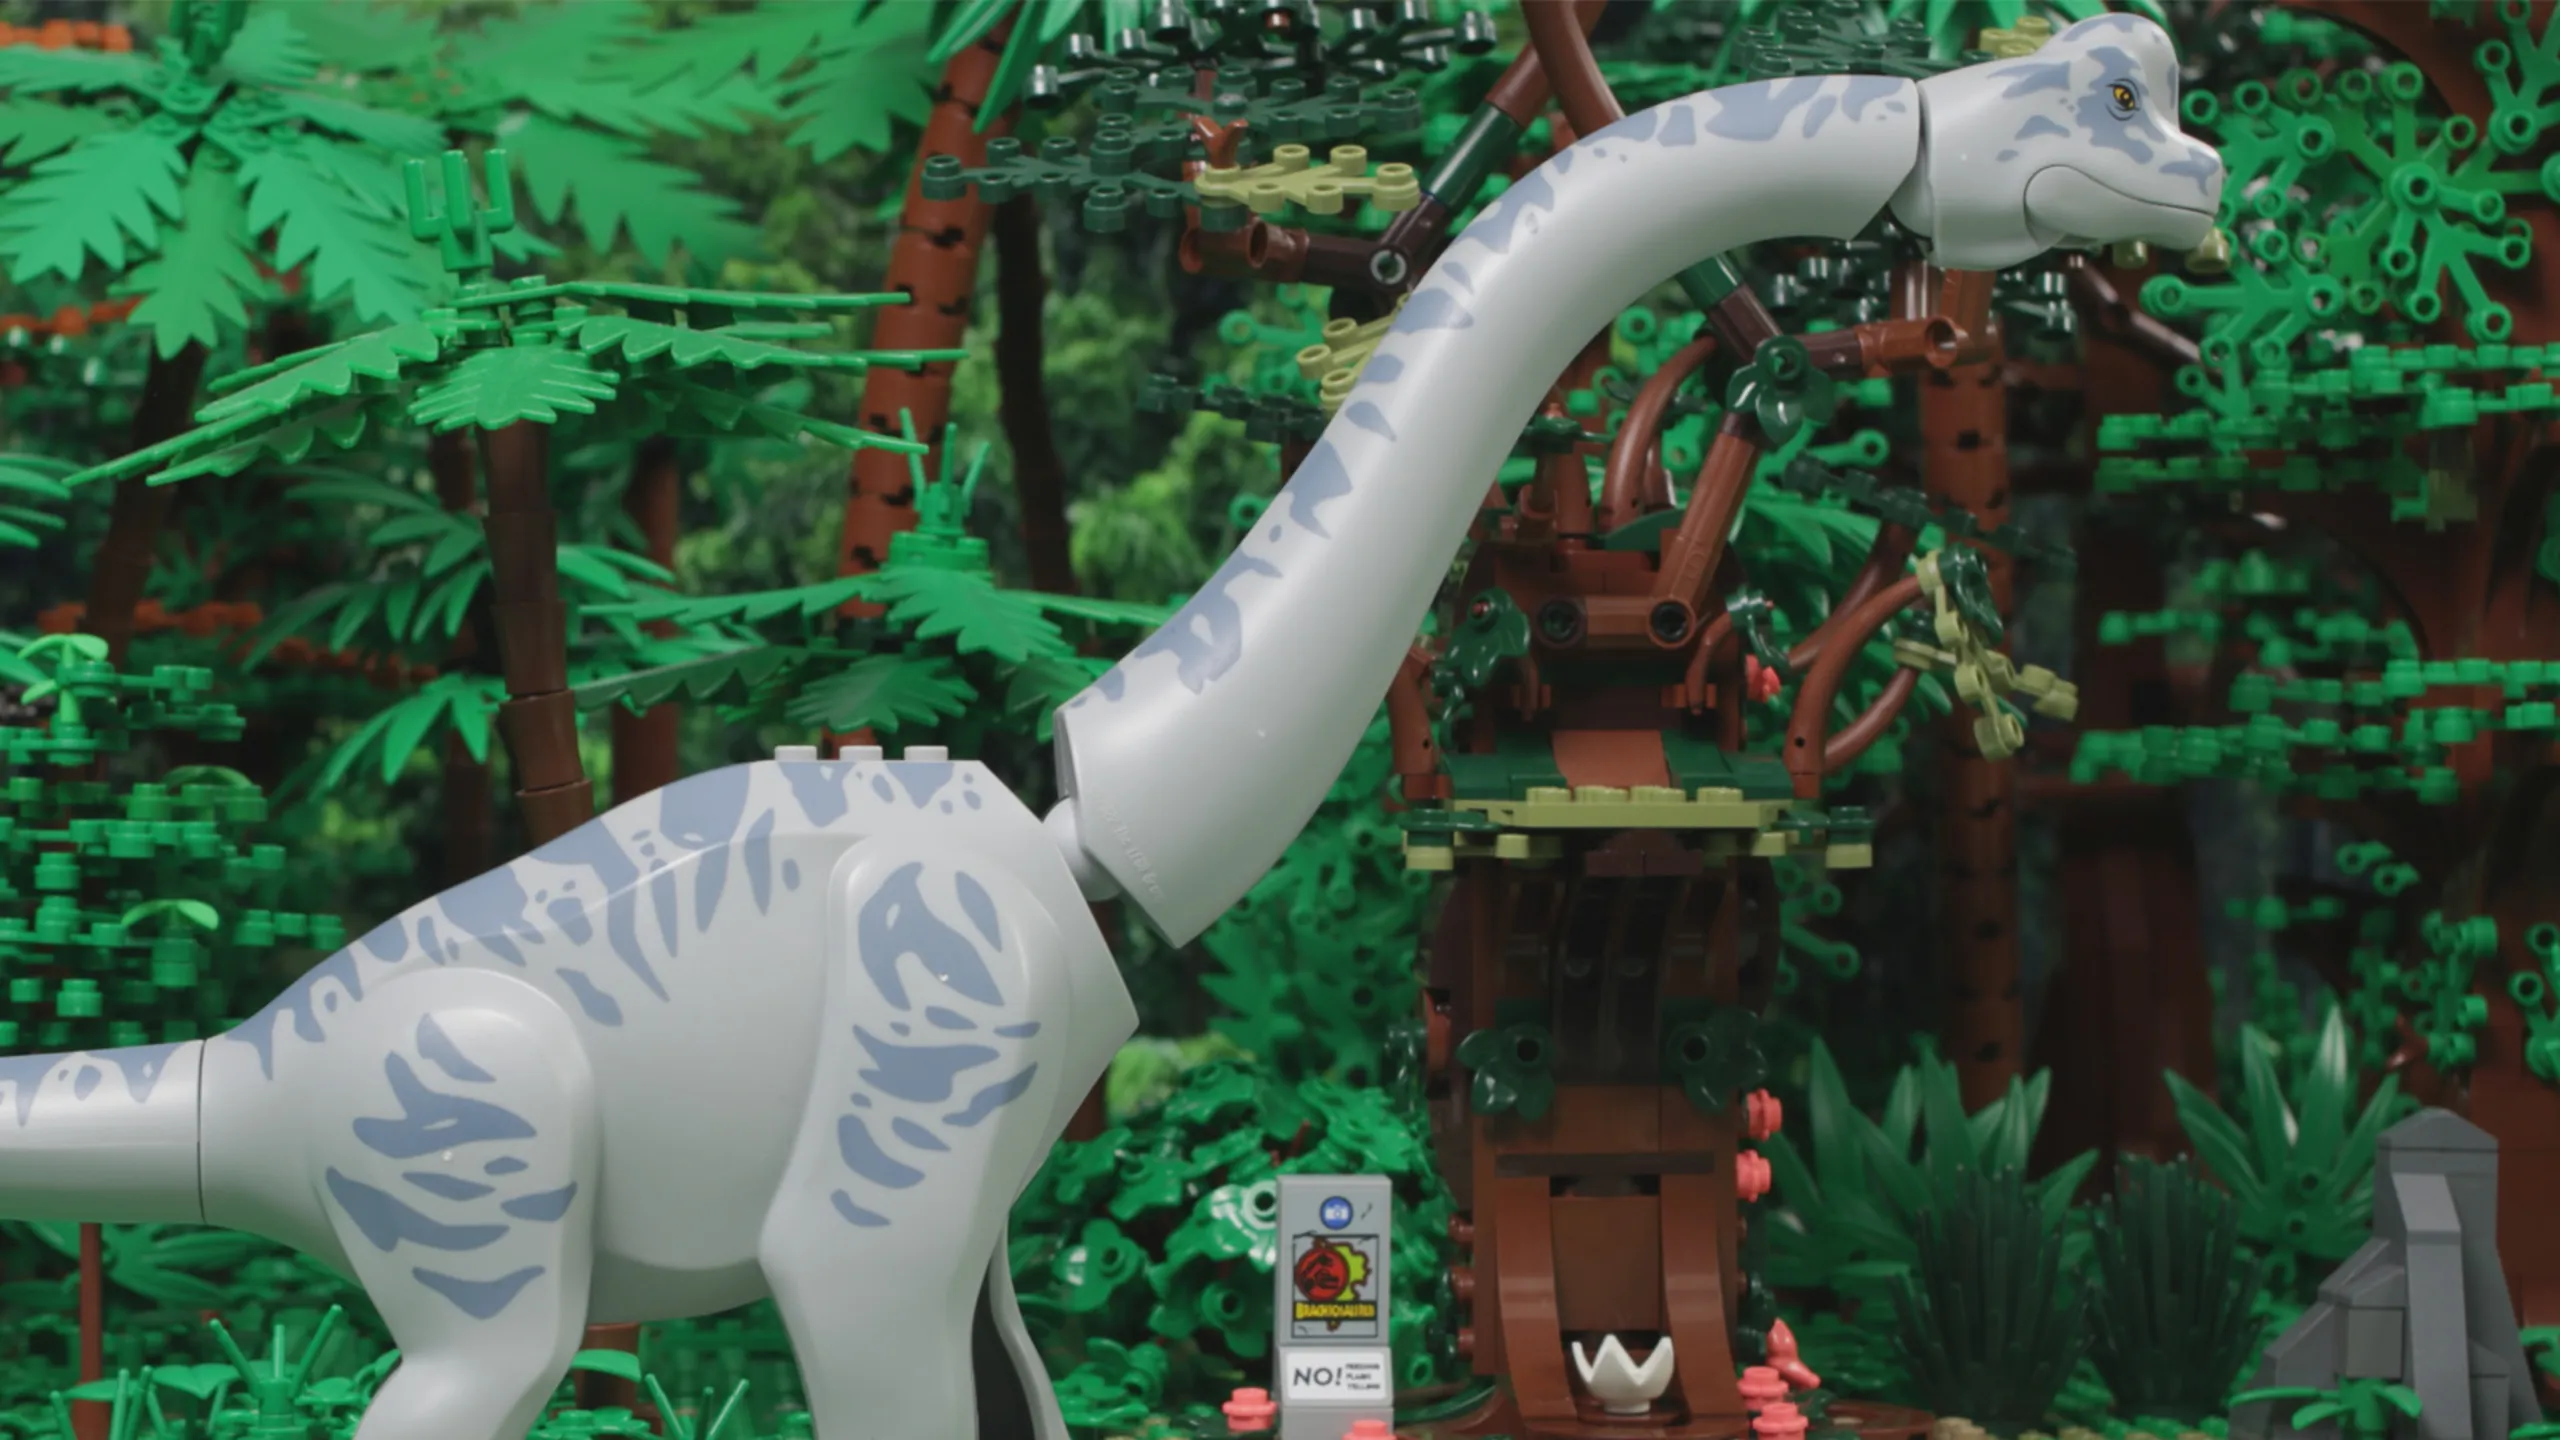 A Day in the Life - LEGO Jurassic World - Mini Movie 